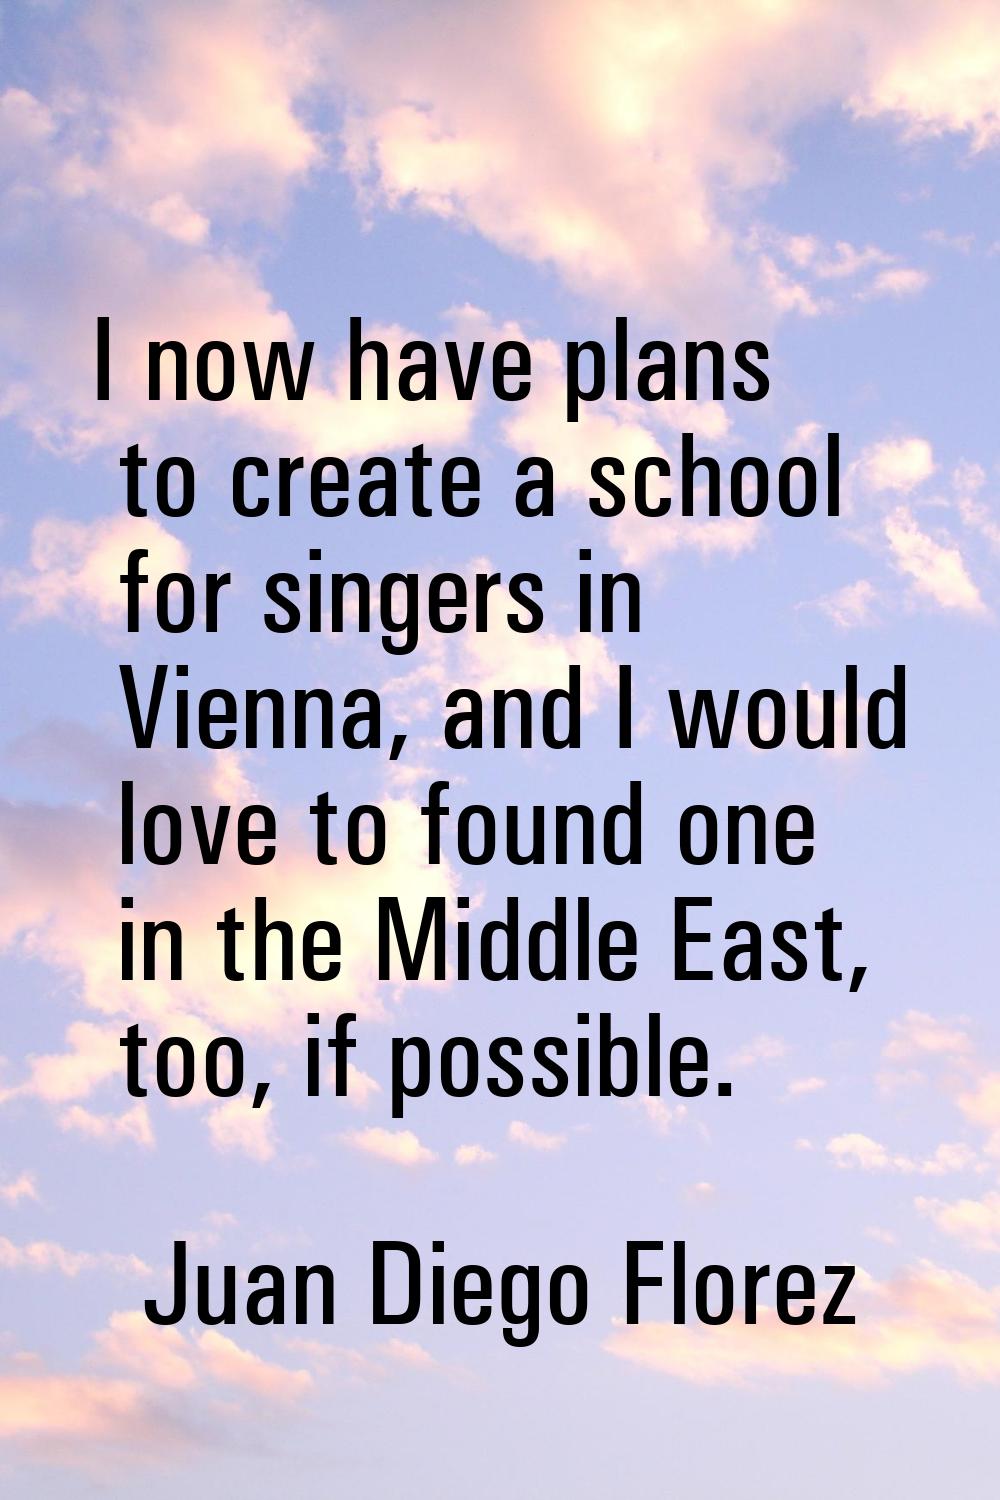 I now have plans to create a school for singers in Vienna, and I would love to found one in the Mid